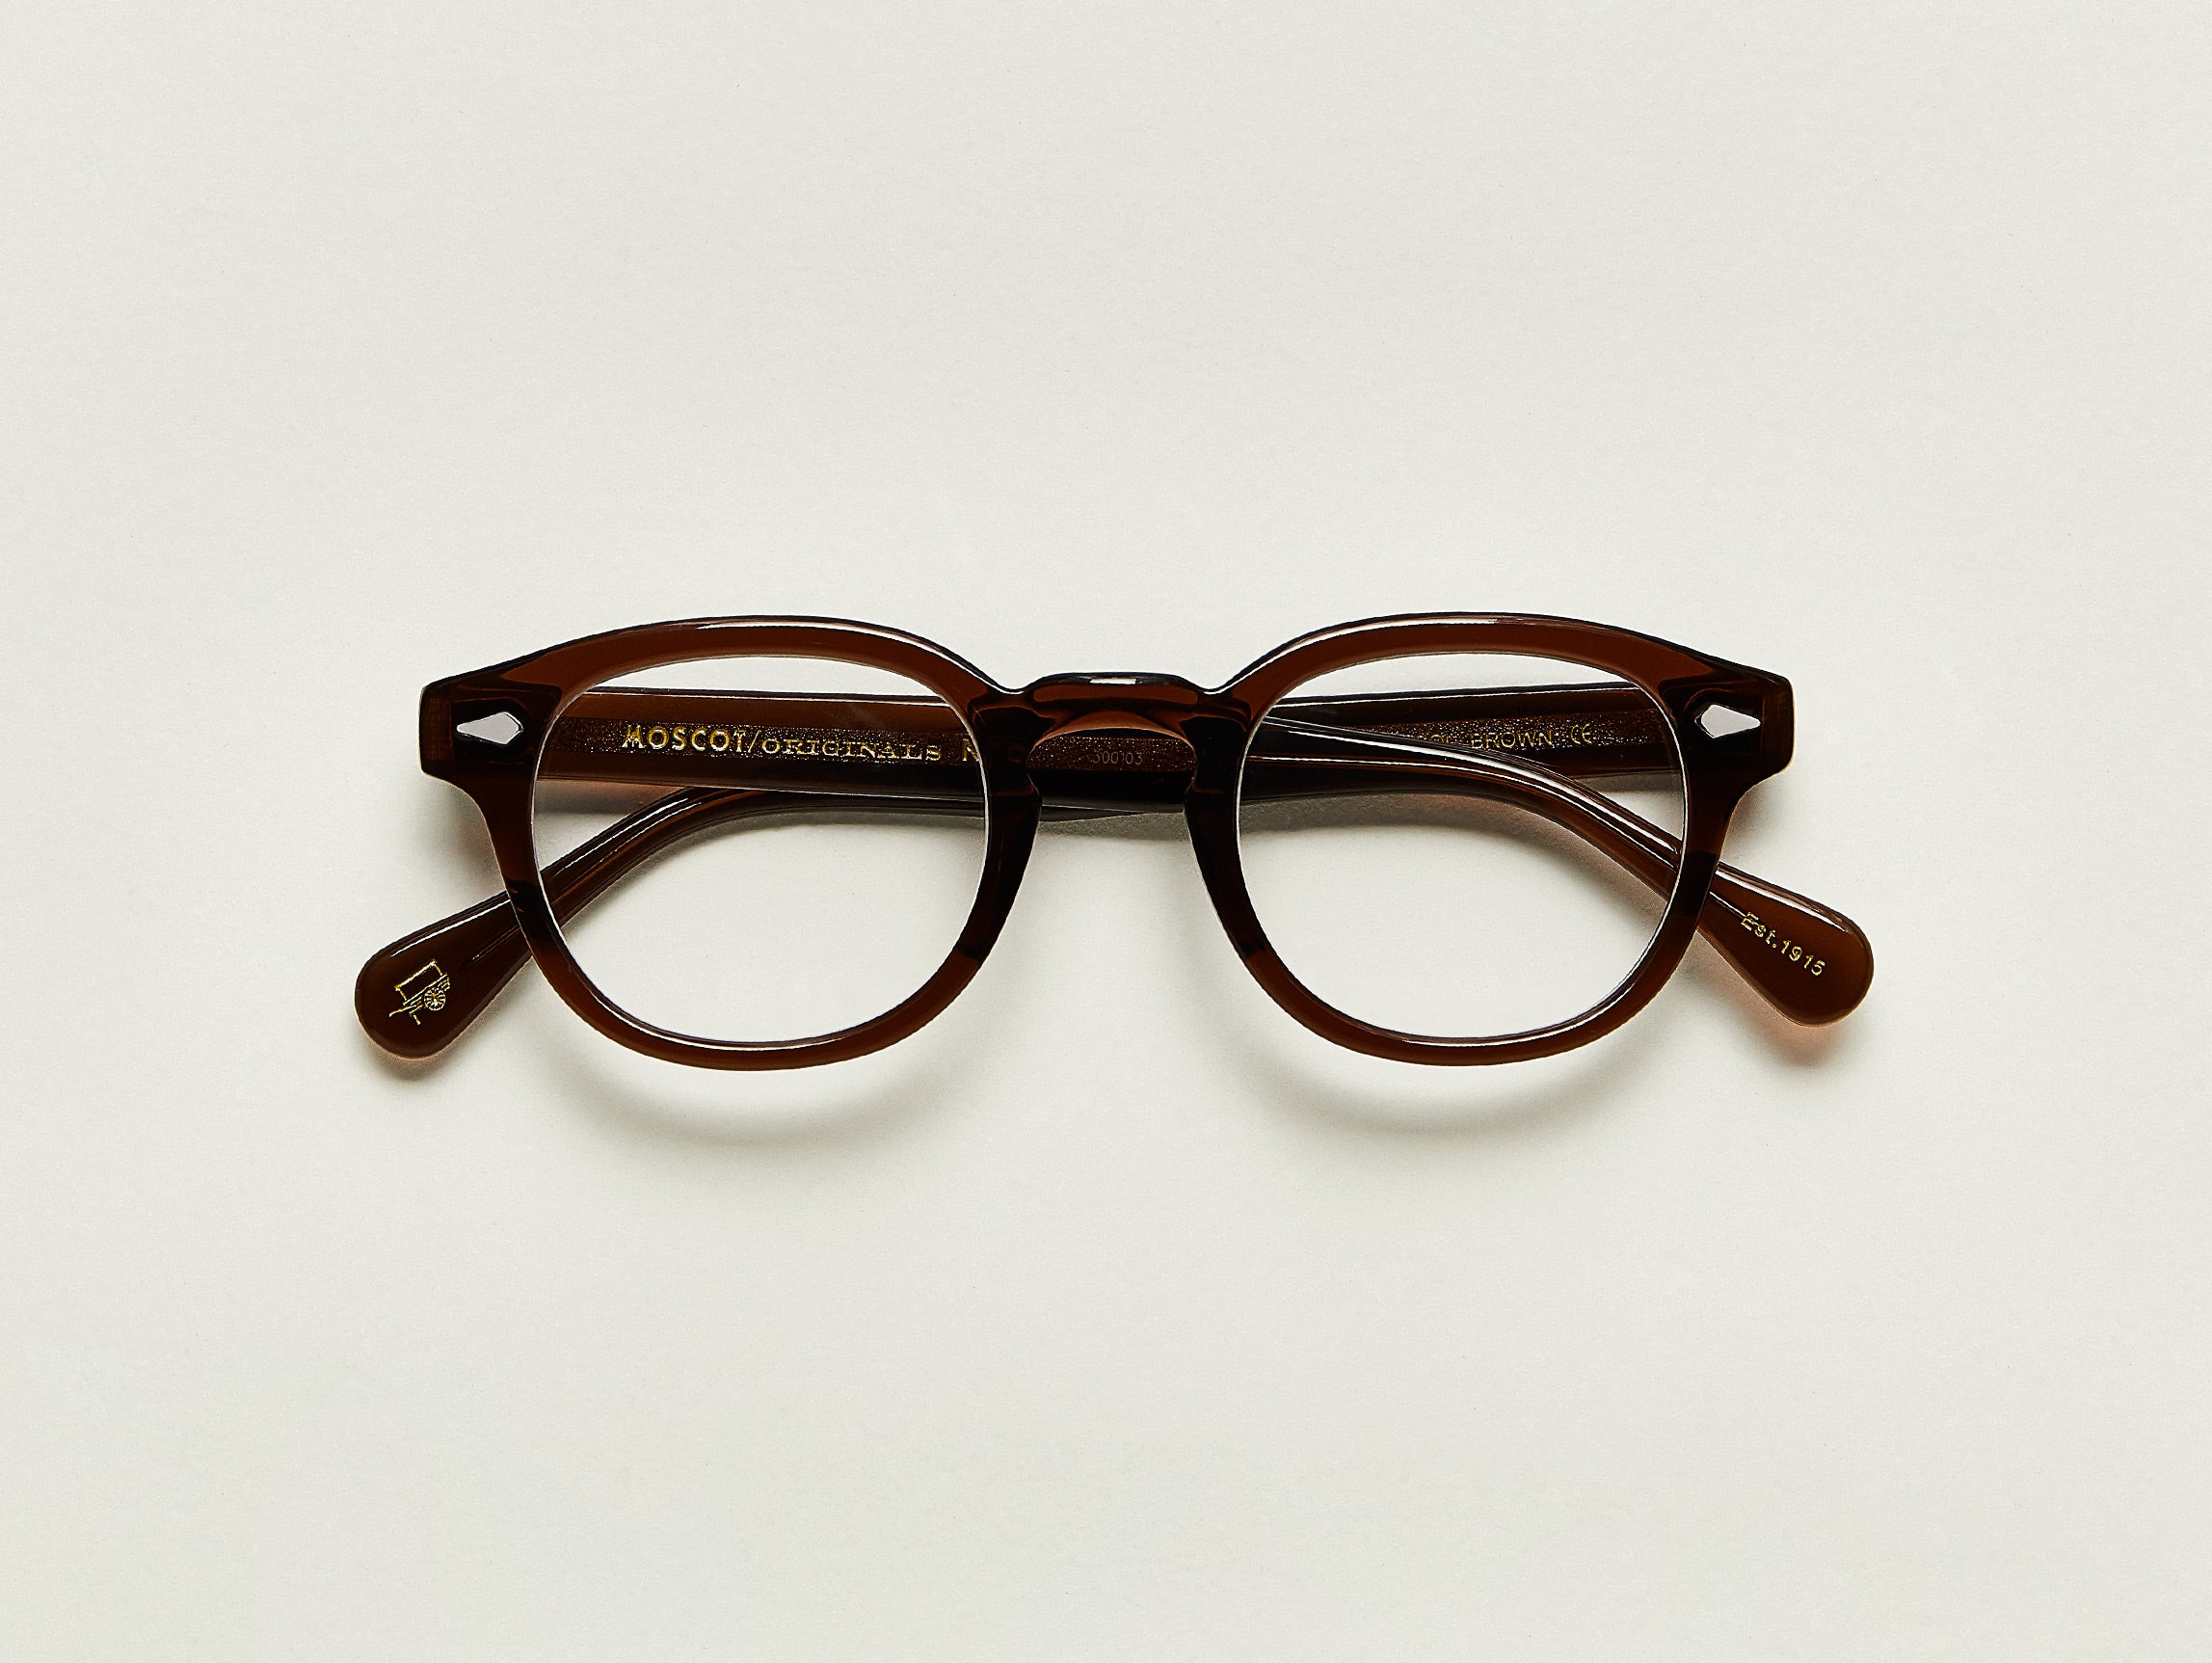 LEMTOSH – MOSCOT NYC SINCE 1915